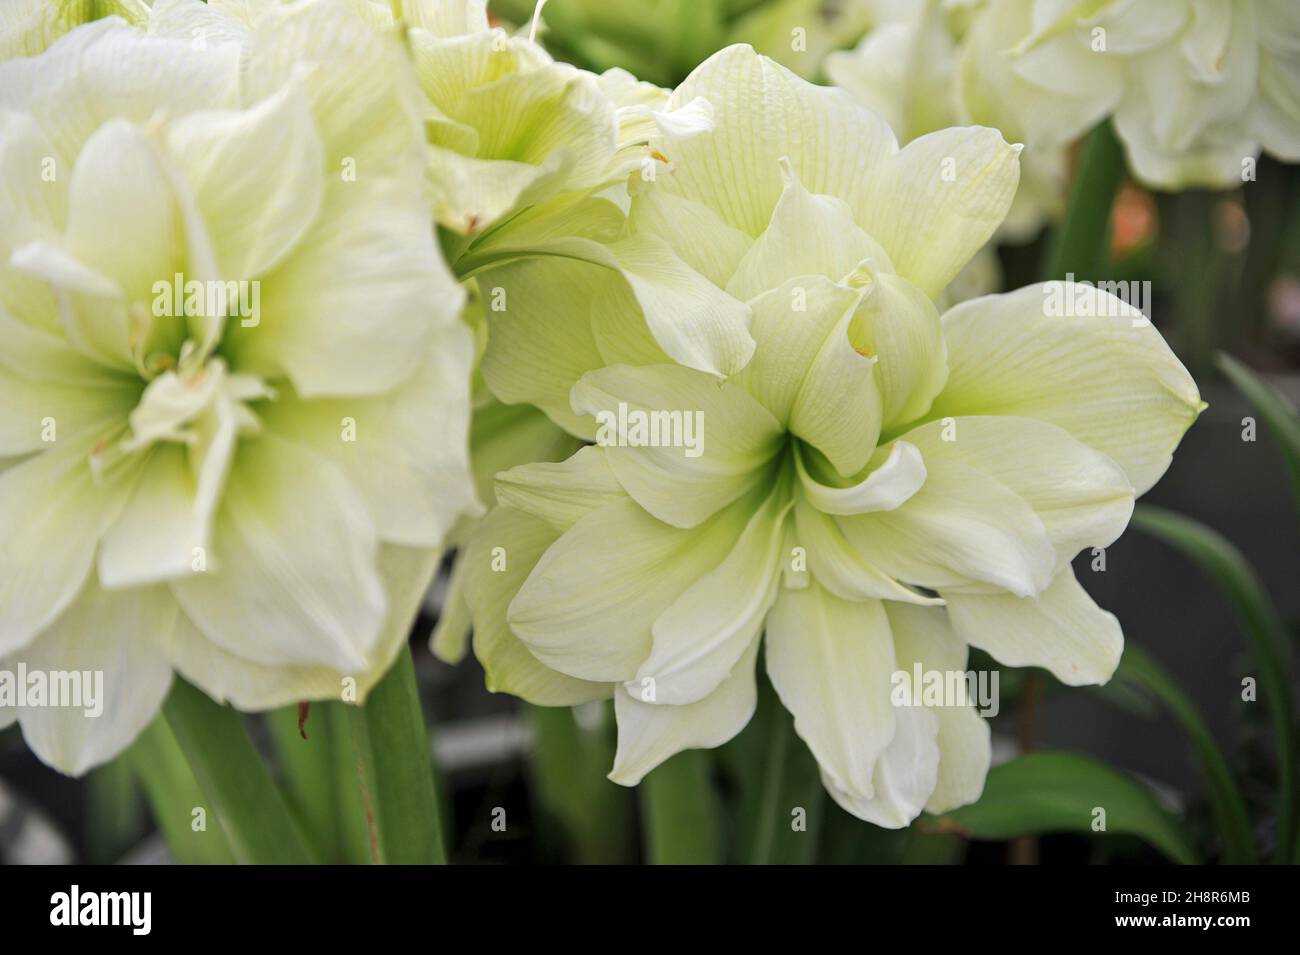 White double-flowered hppeastrum (Amaryllis) Marilyn blooms in a garden in April Stock Photo